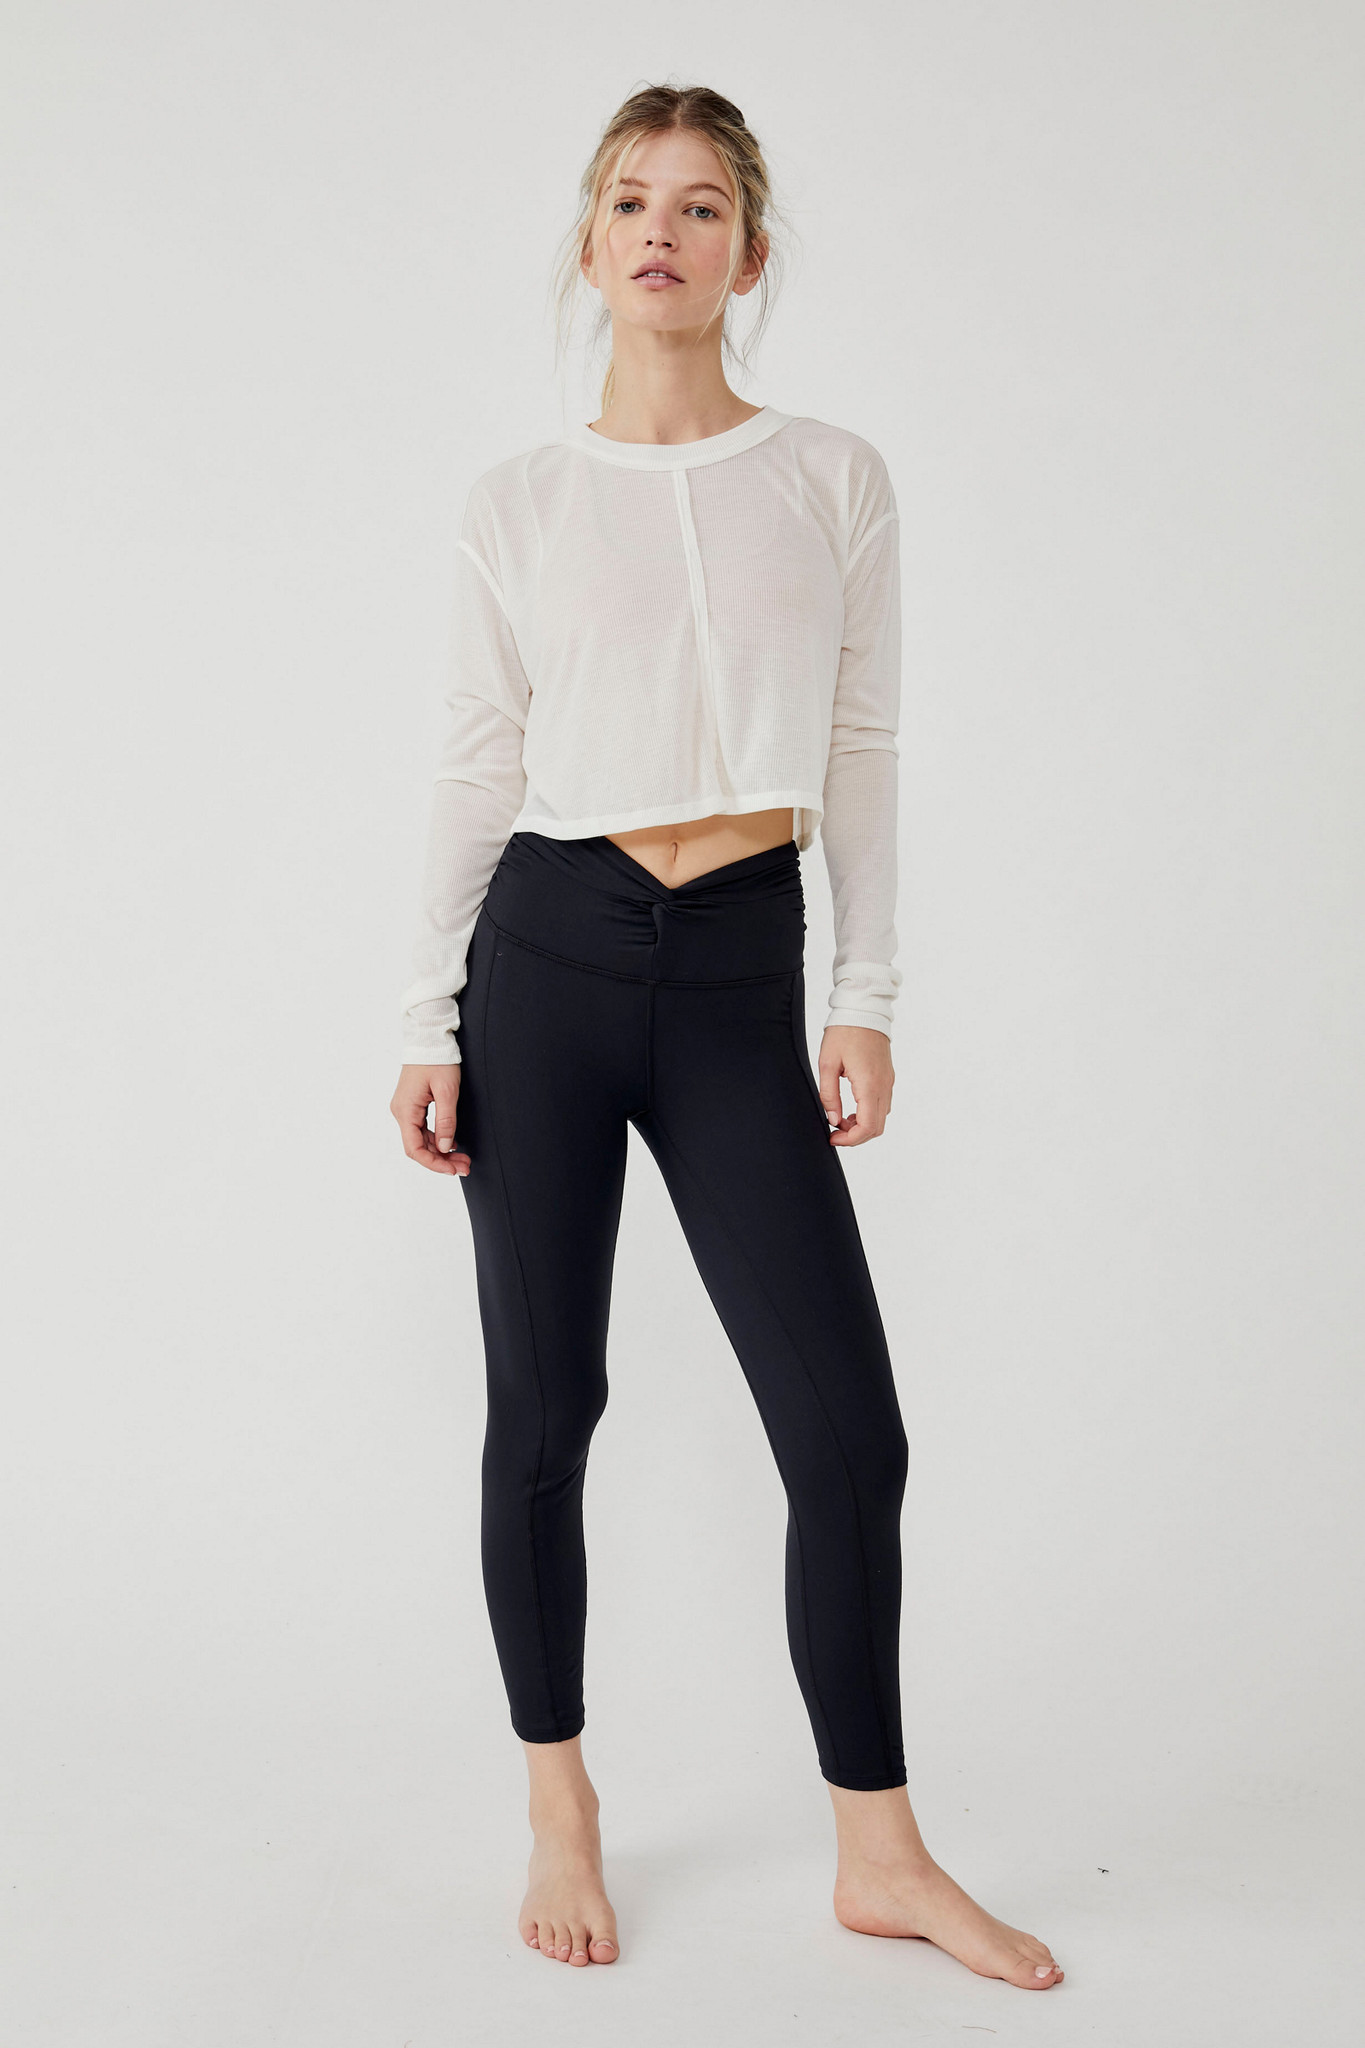 FREE PEOPLE FP Movement - High-Rise Ankle Breathe Deeper Leggings